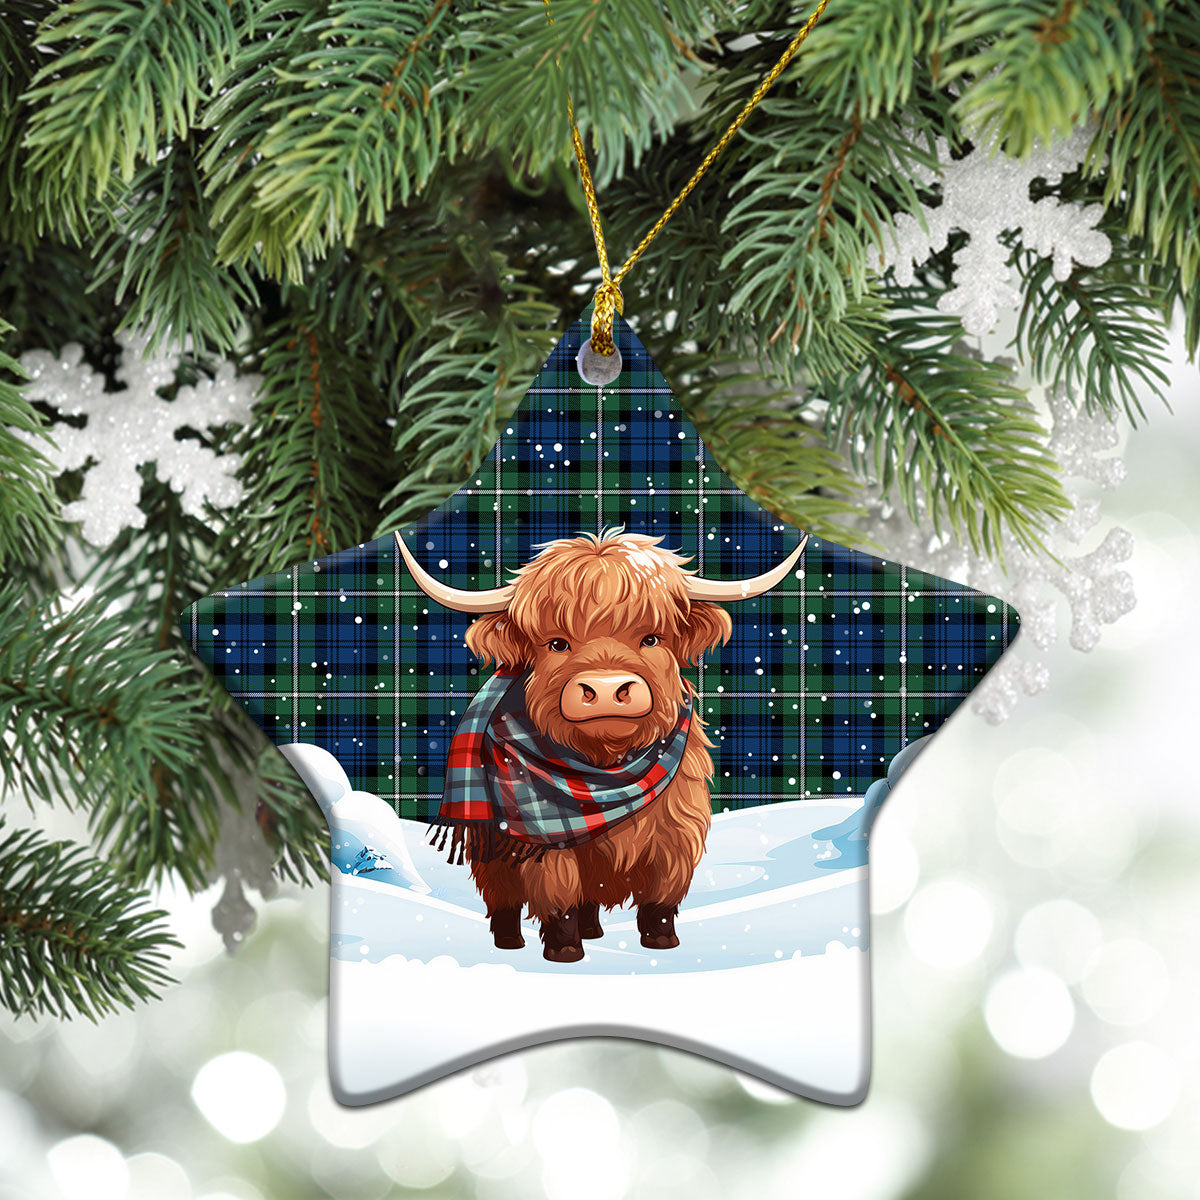 Forbes Ancient Tartan Christmas Ceramic Ornament - Highland Cows Snow Style